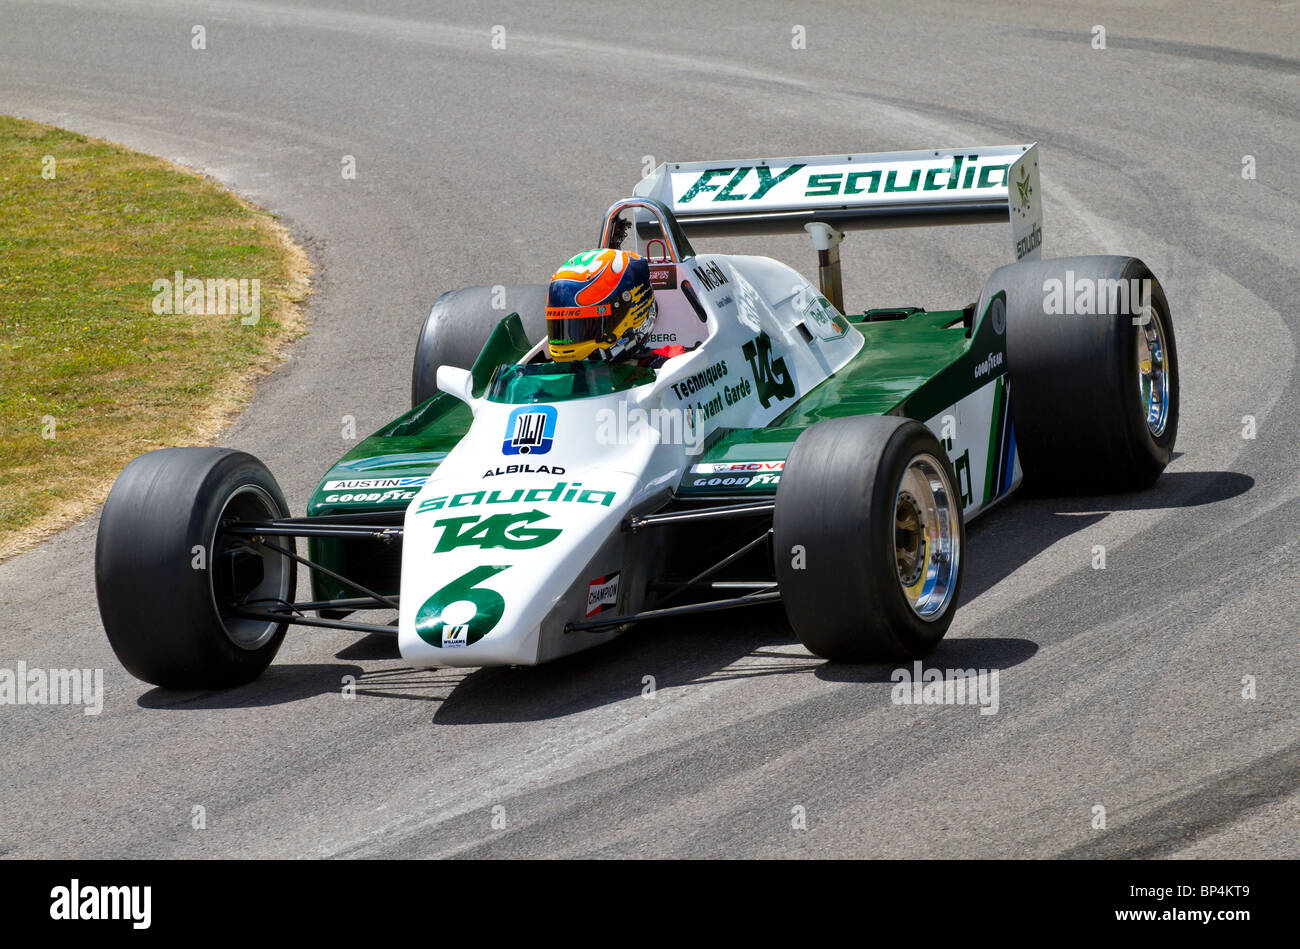 1982-williams-cosworth-fw08-with-driver-